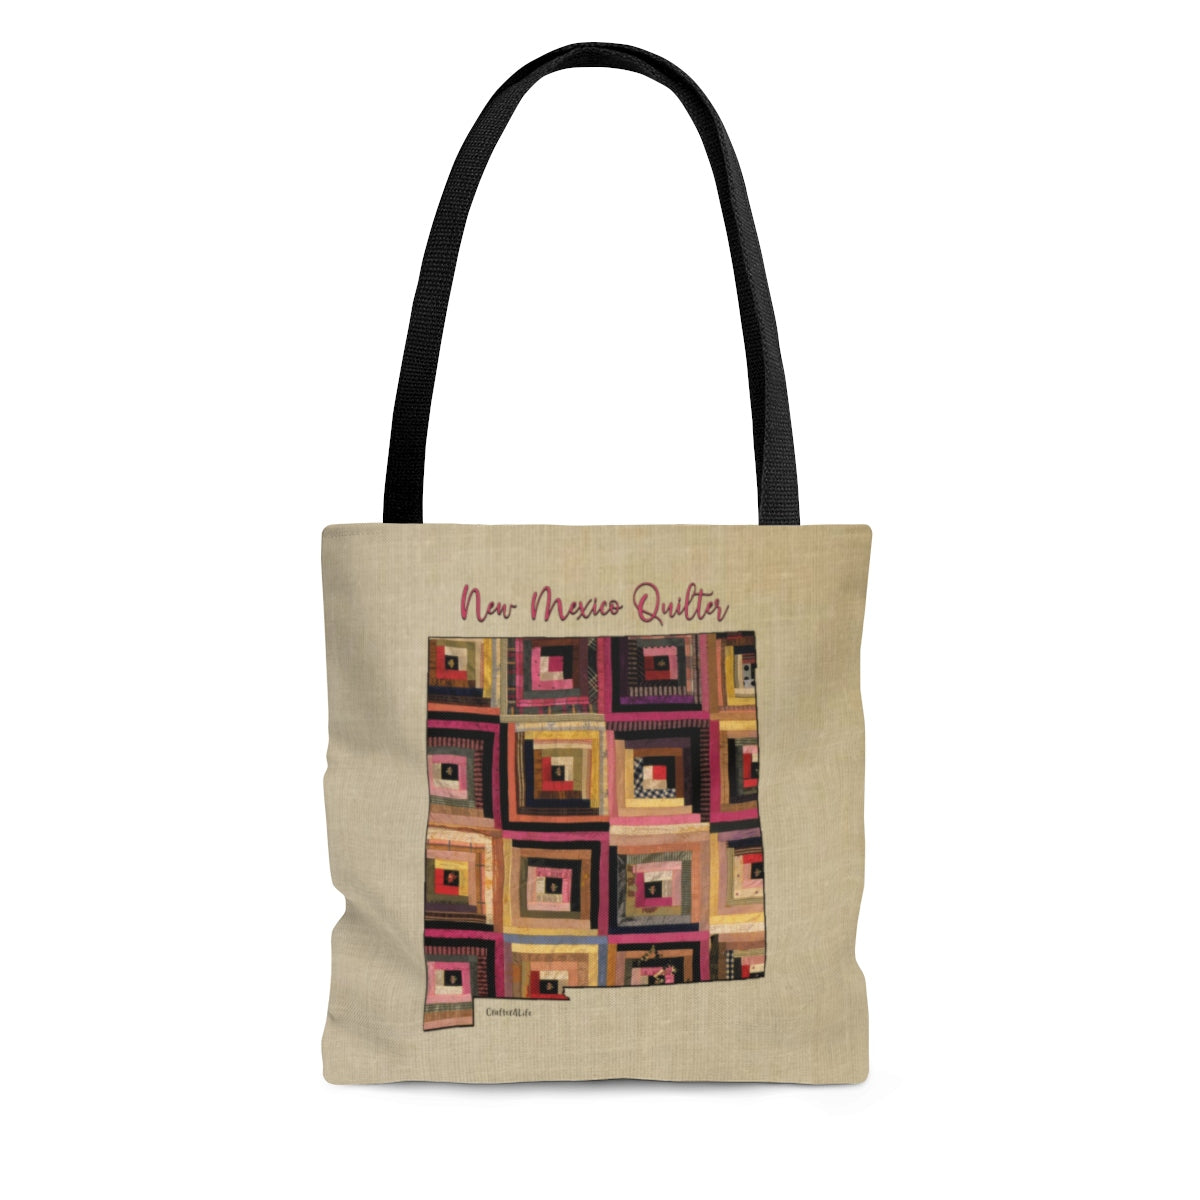 New Mexico Quilter Cloth Tote Bag